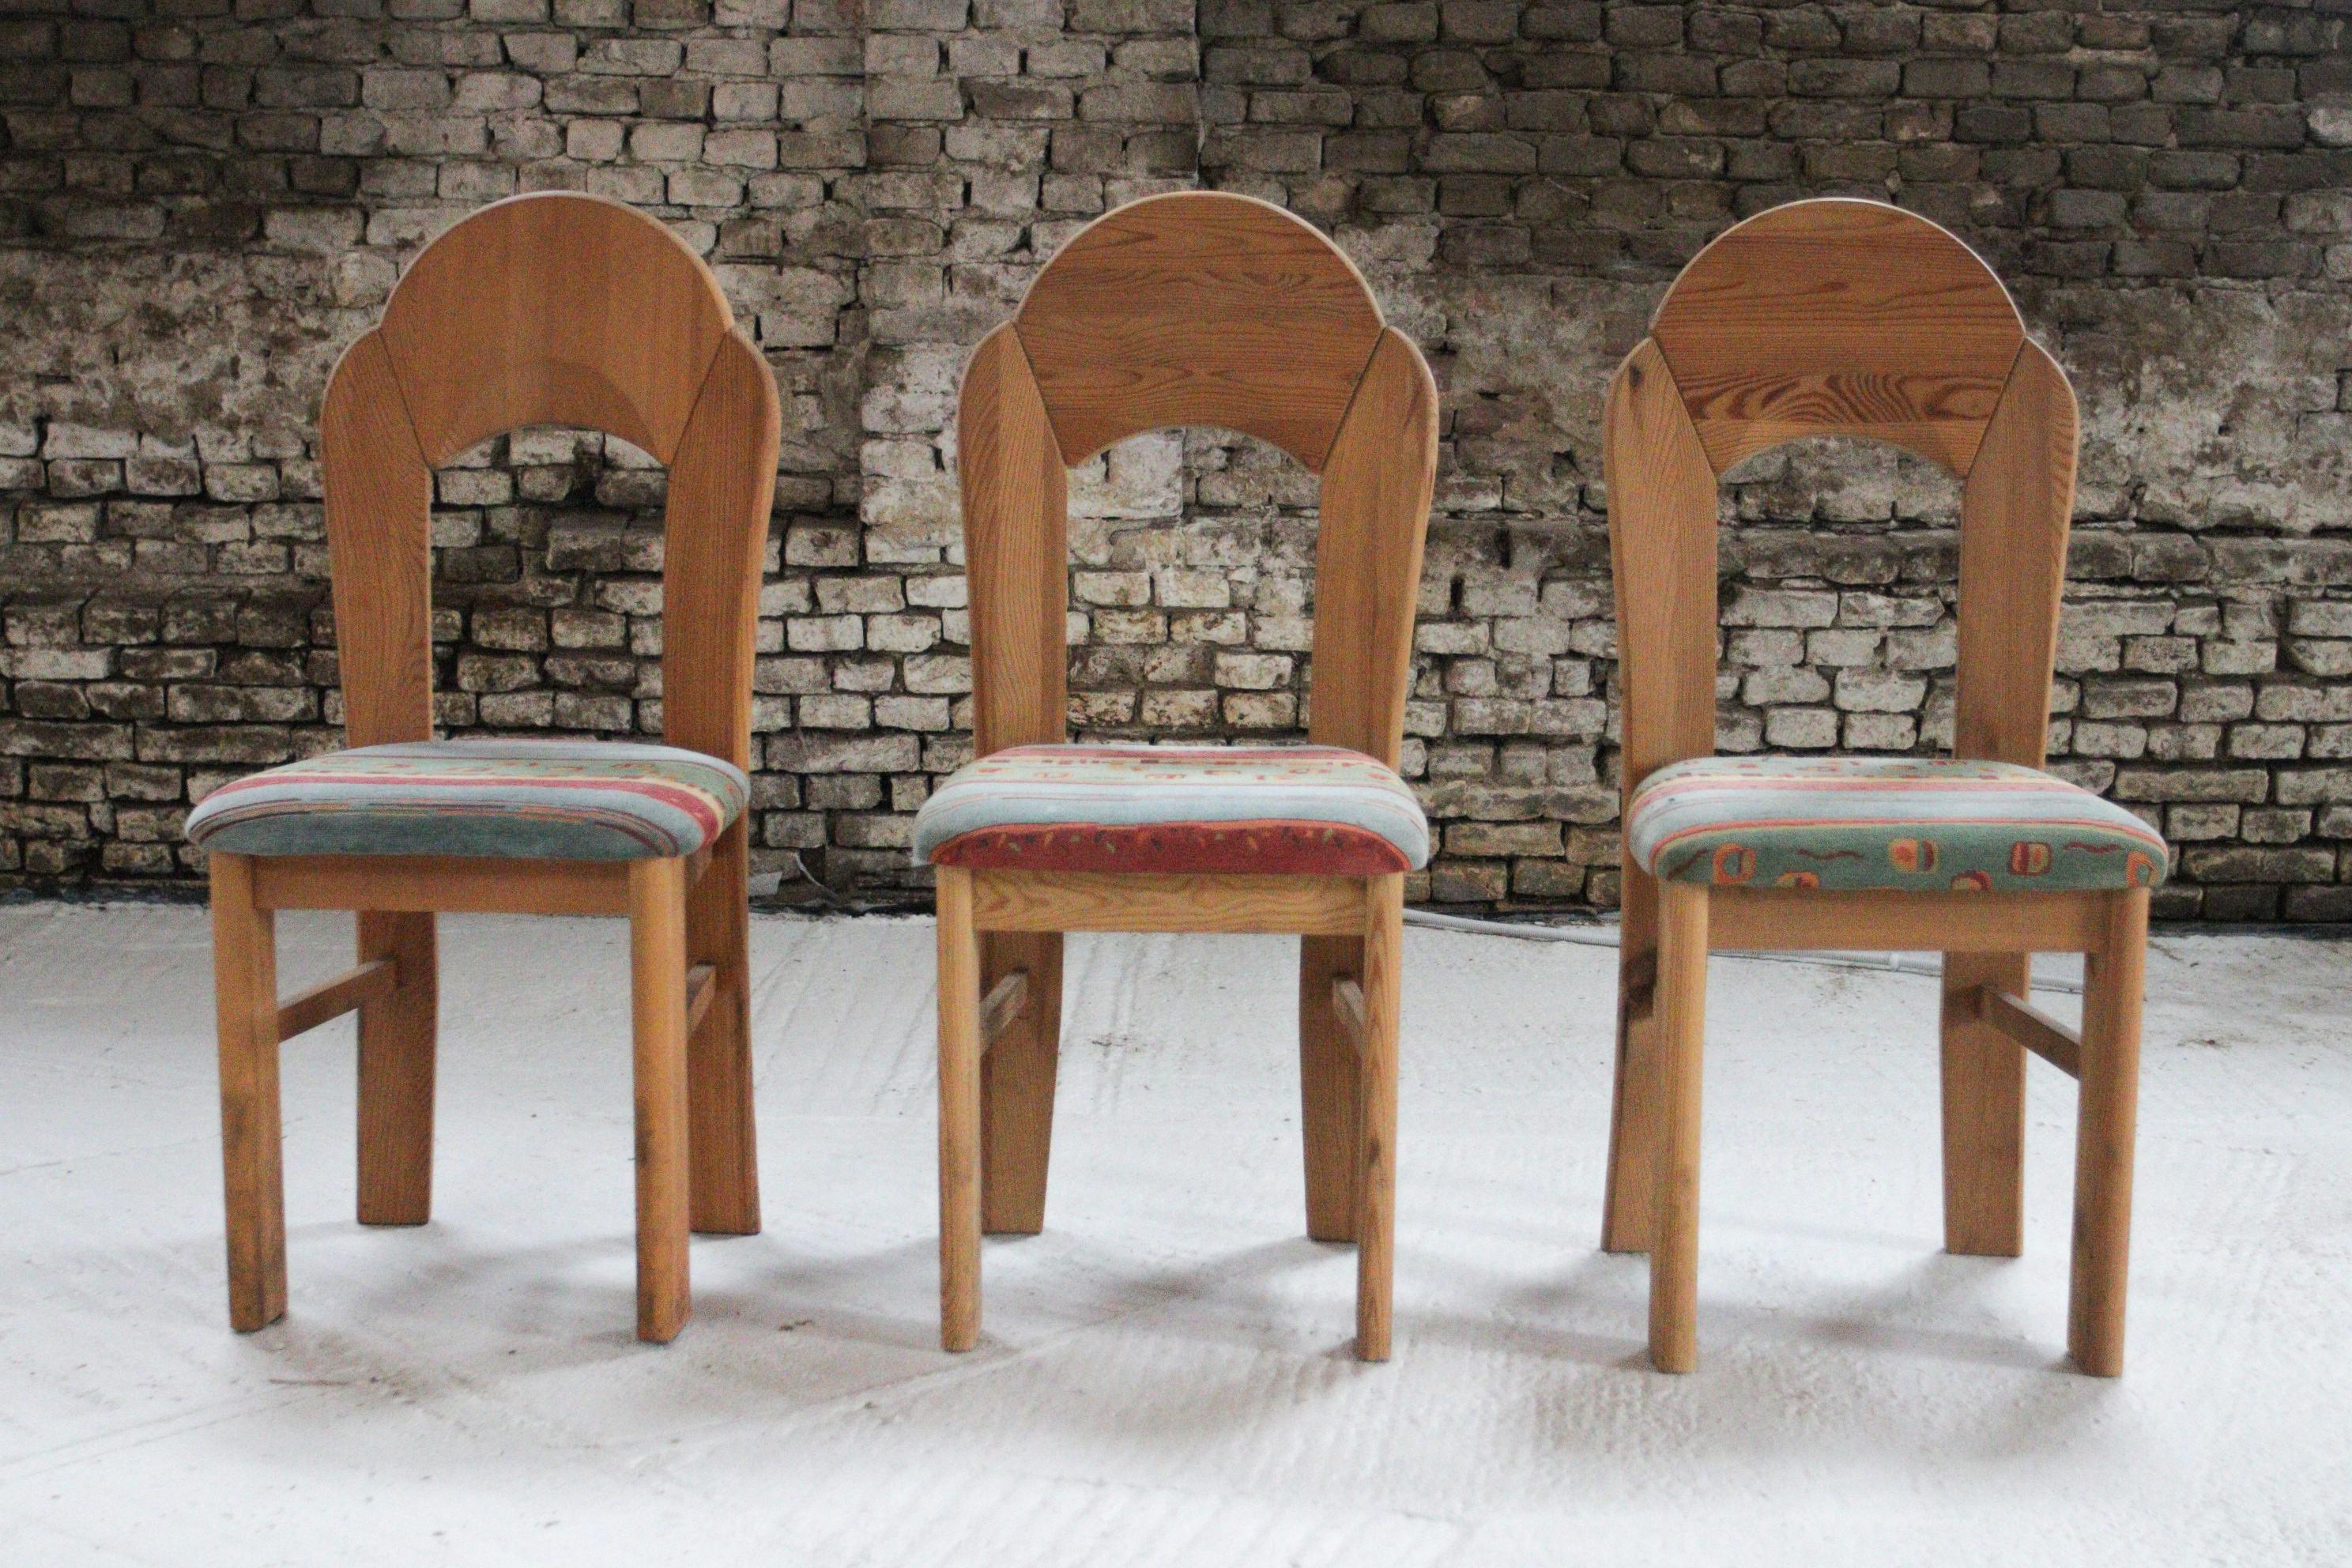 Embrace the vivacious spirit of the '80s with this striking set of chairs. Crafted with solid pine, each chair stands as a robust testament to the era's bold experimentation with form and material.

The chairs' design features a distinctive high